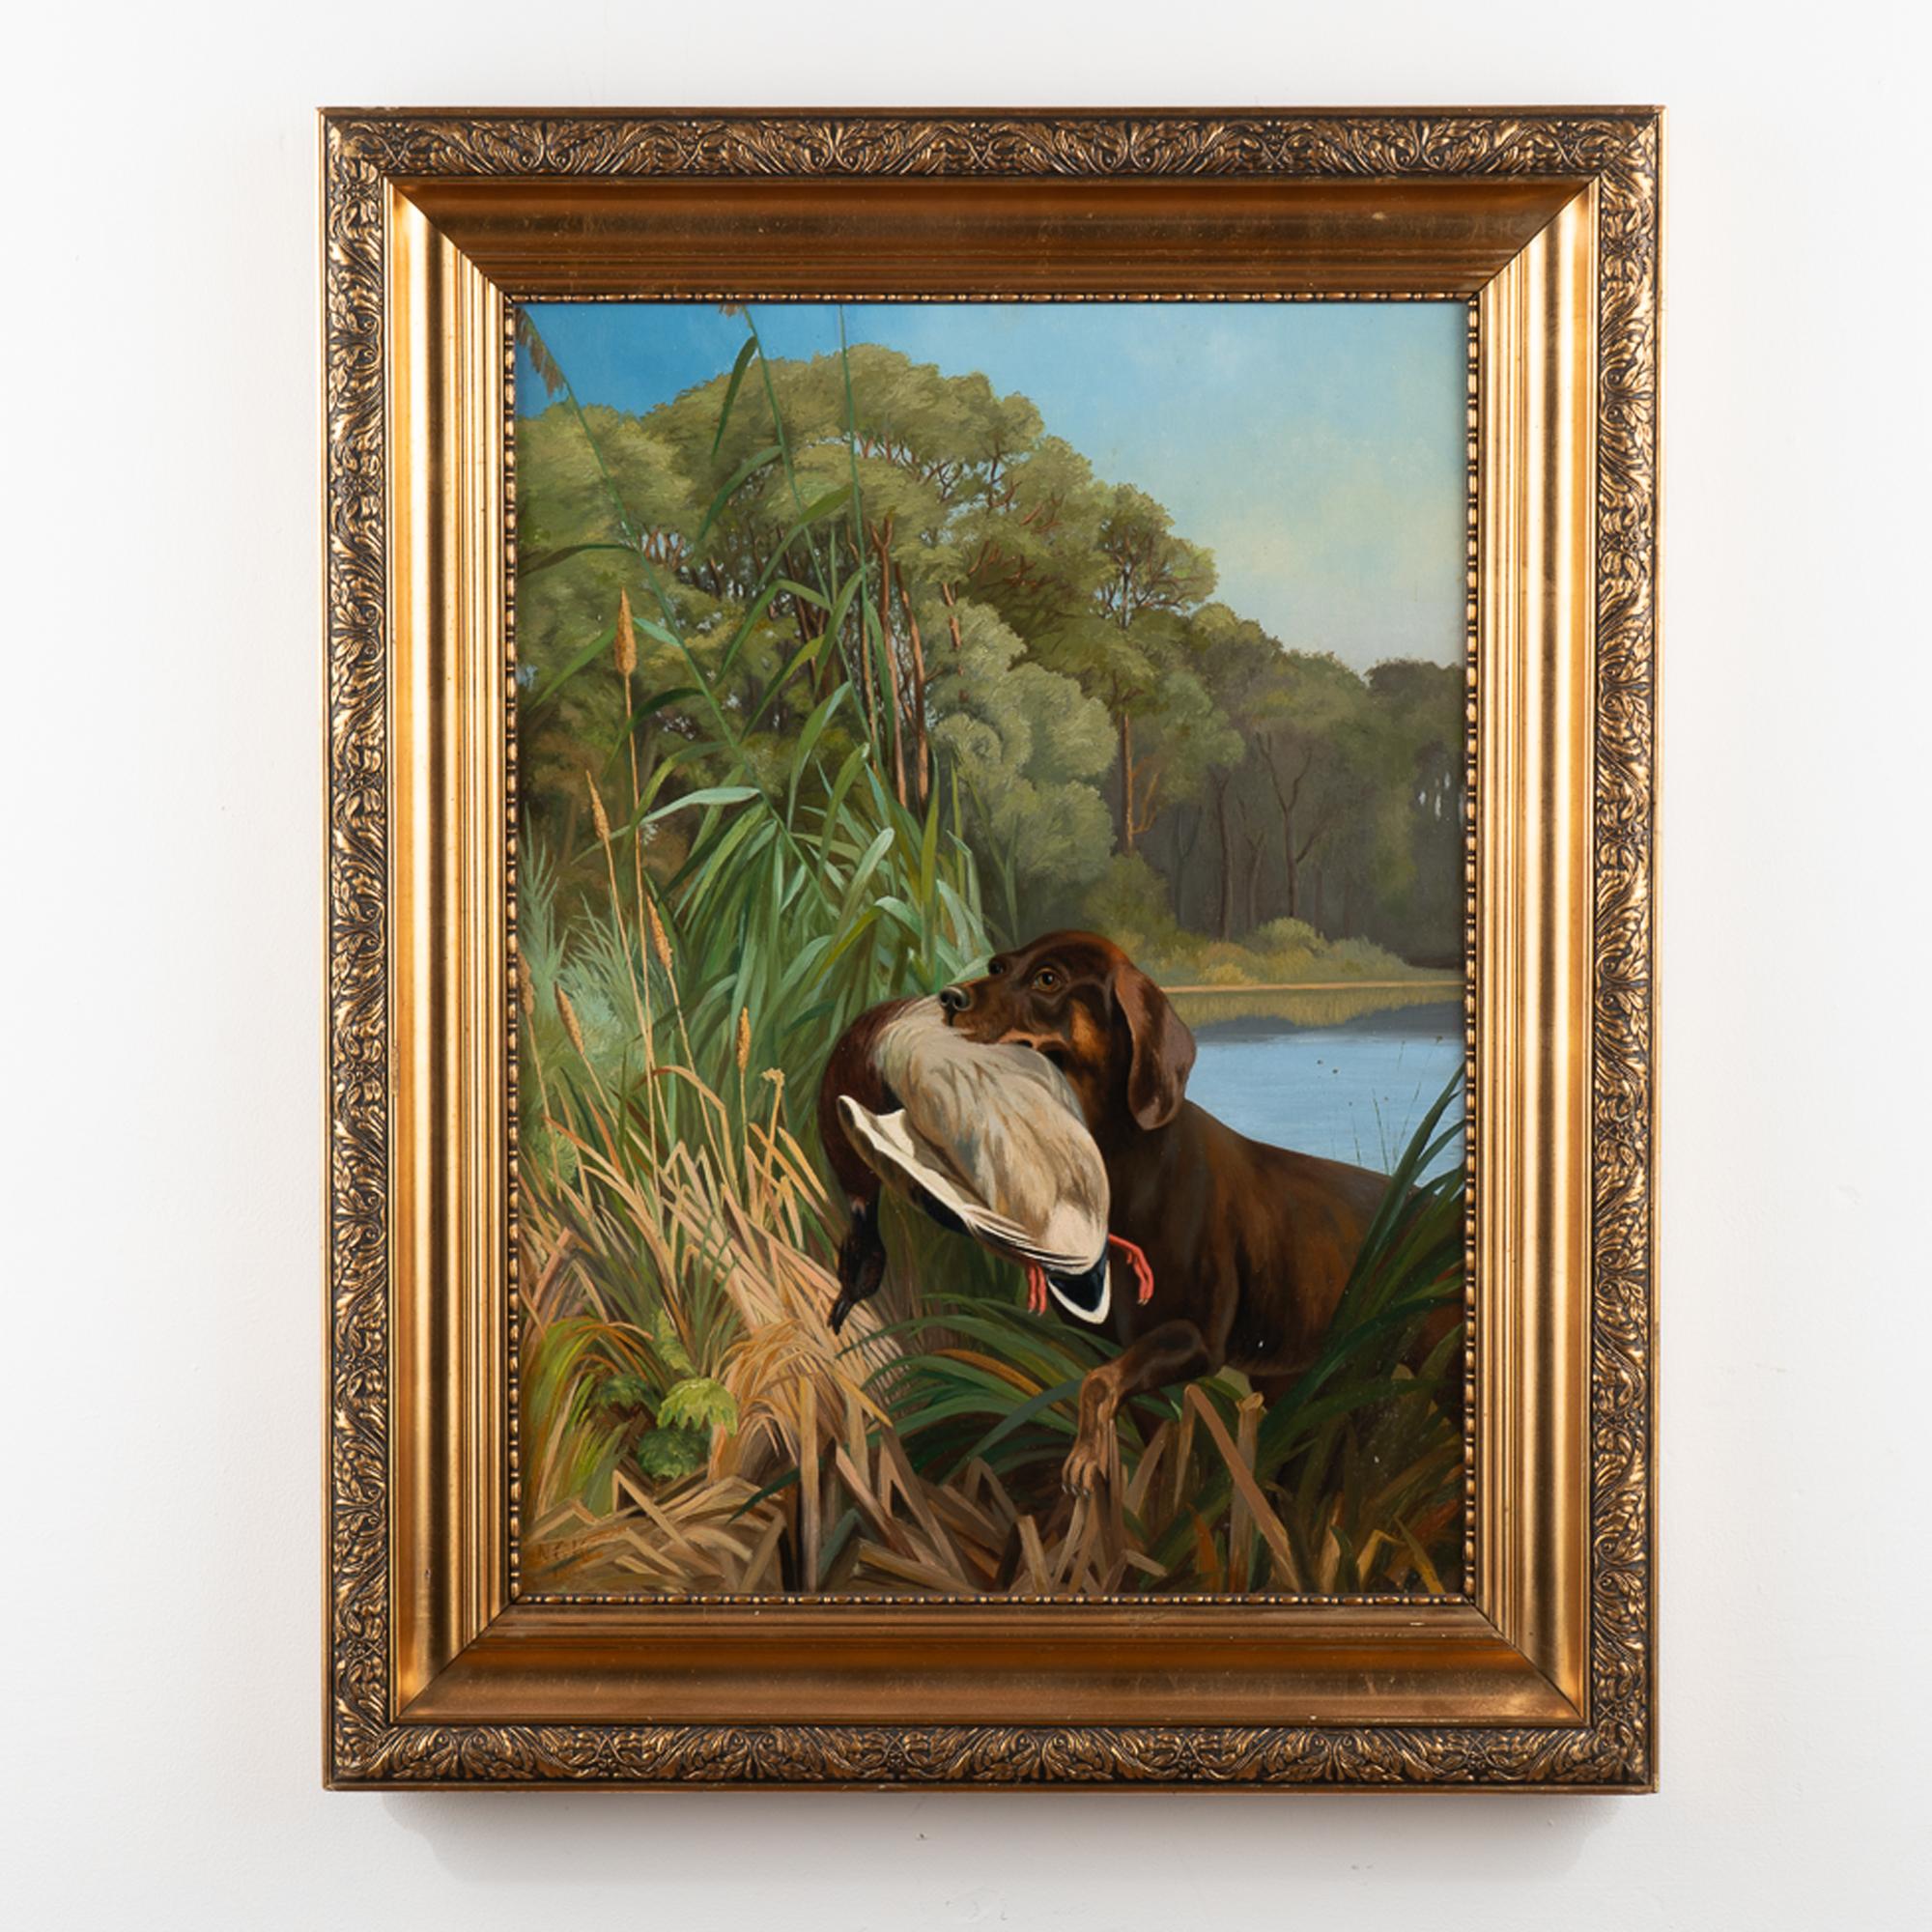 Original oil on canvas painting of hunting scene with retriever exiting water bringing a duck back to shore. 
The colors of green, blue, brown and white remain vivid on this painting dated 1899 by unknown artist, signature NGK.
Age related